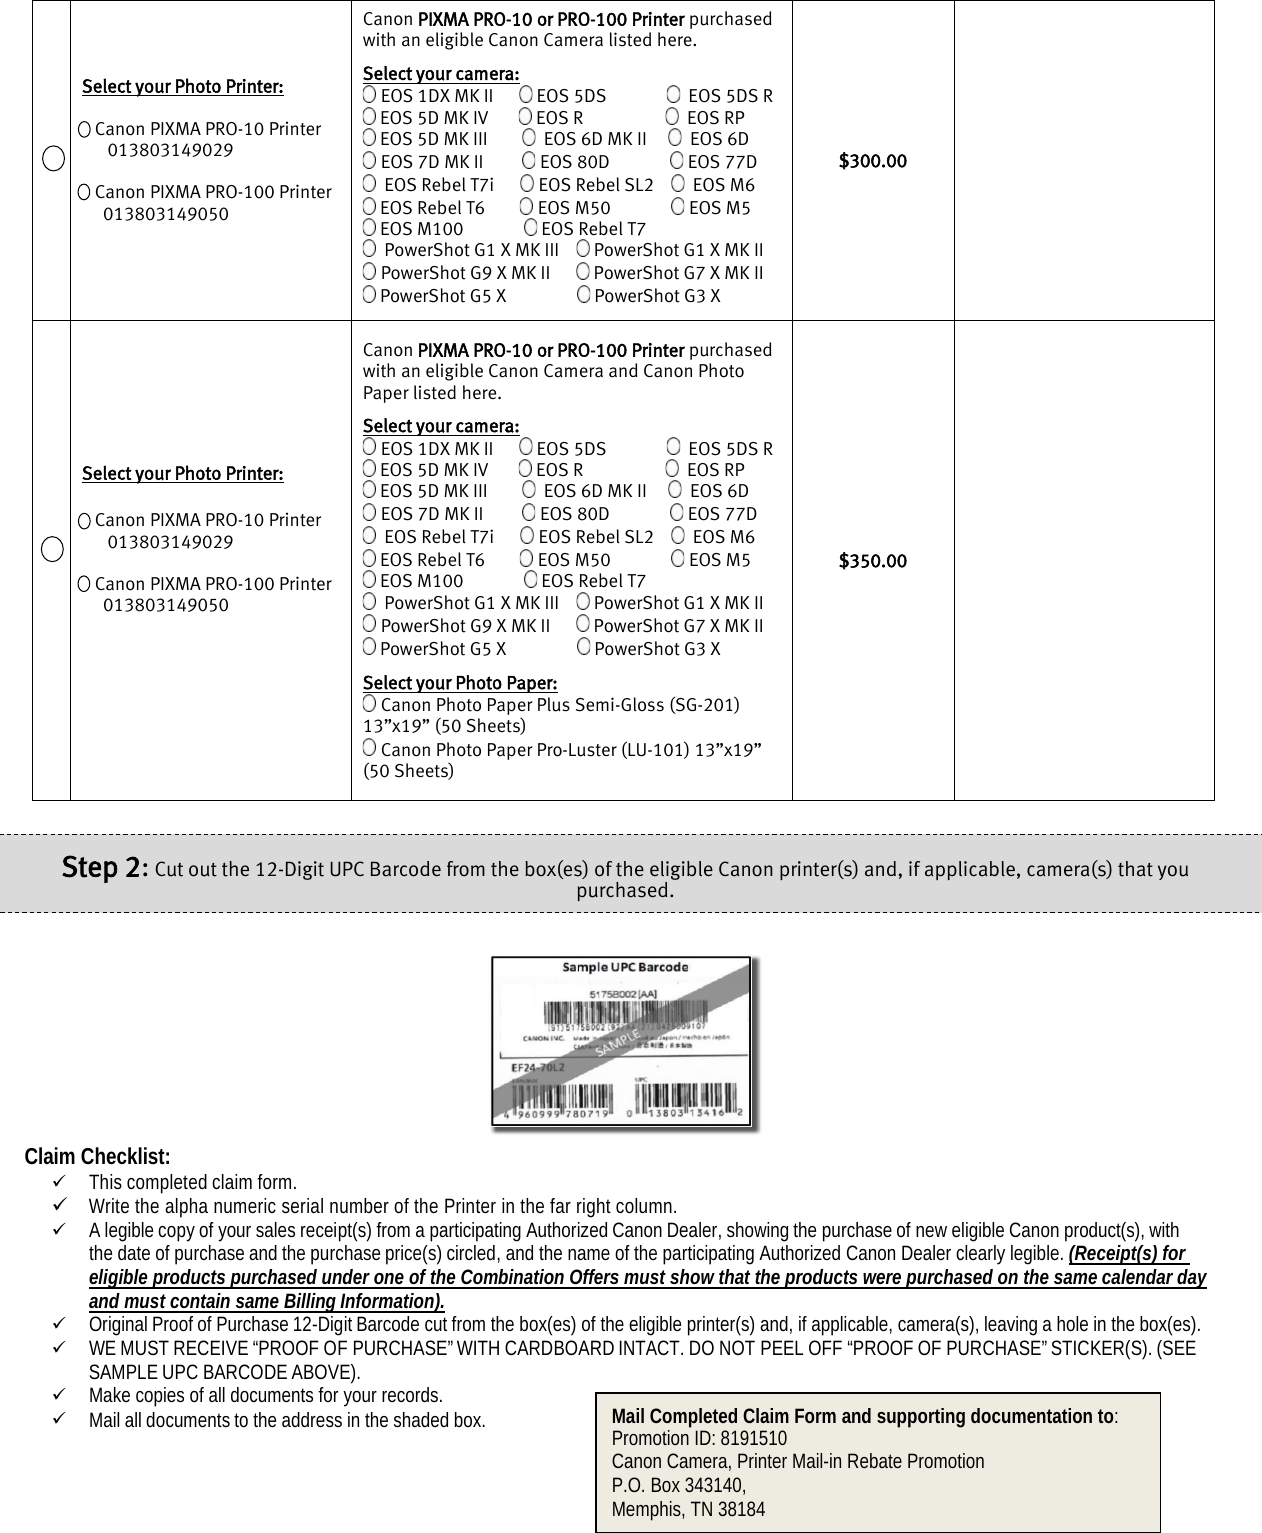 Page 2 of 3 - Canon  PIXMA Pro Printer Mail-in-Rebate IJP Camera MIR Claim Form Mar Apr 2019